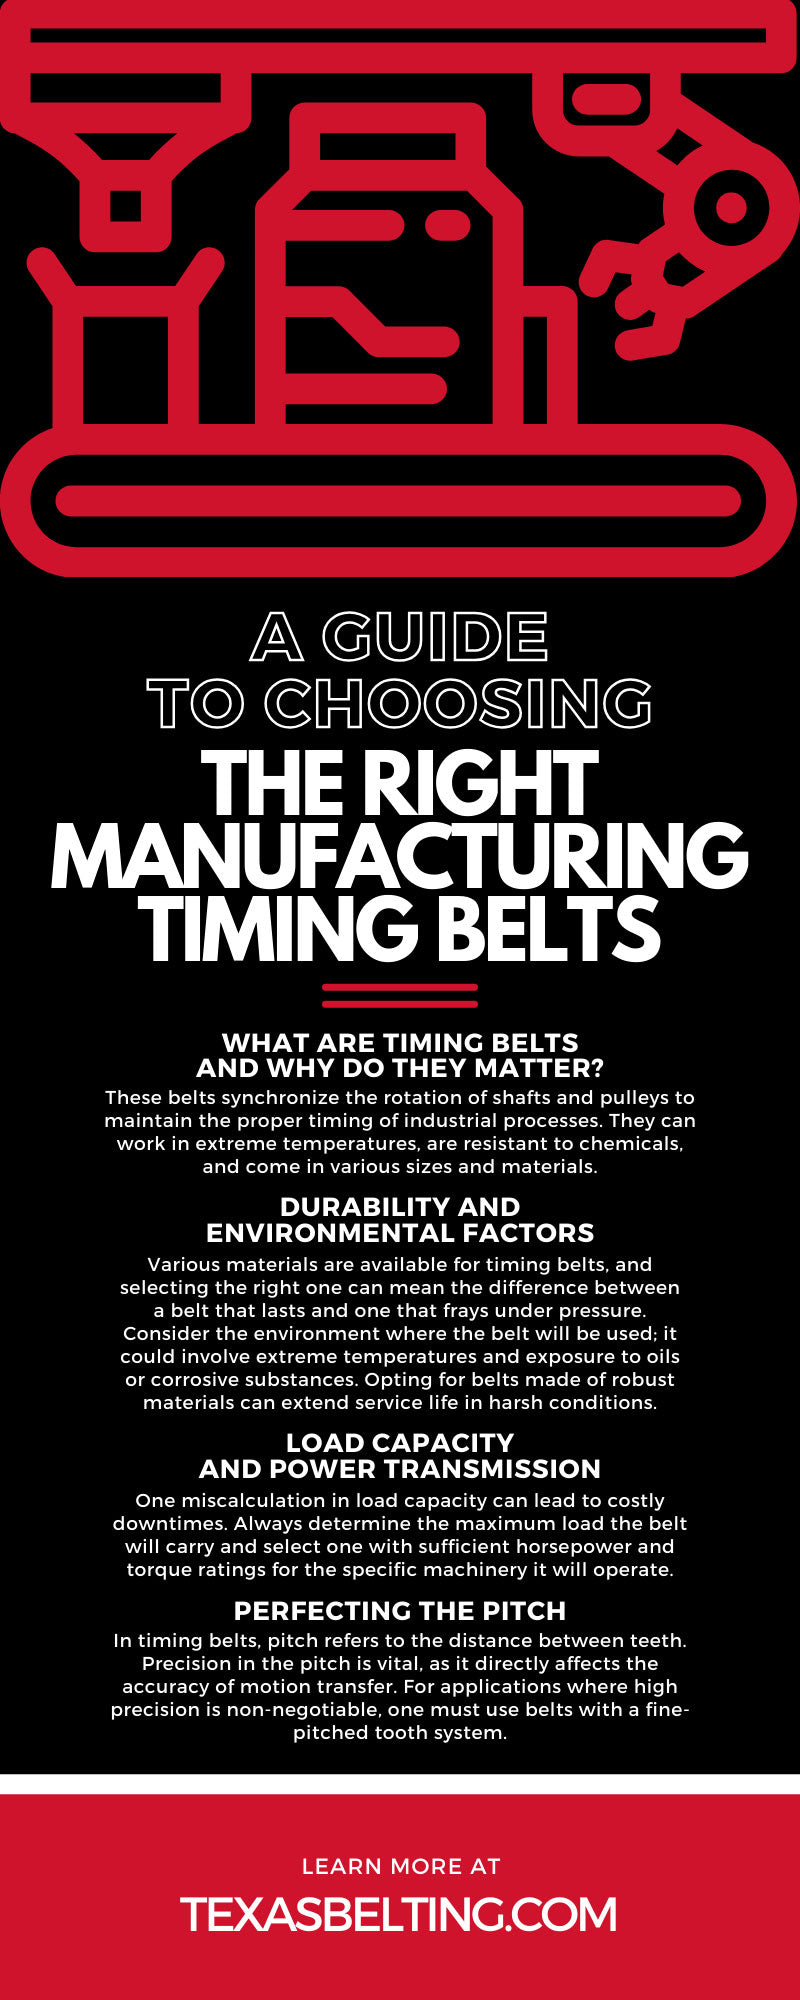 A Guide to Choosing the Right Manufacturing Timing Belts